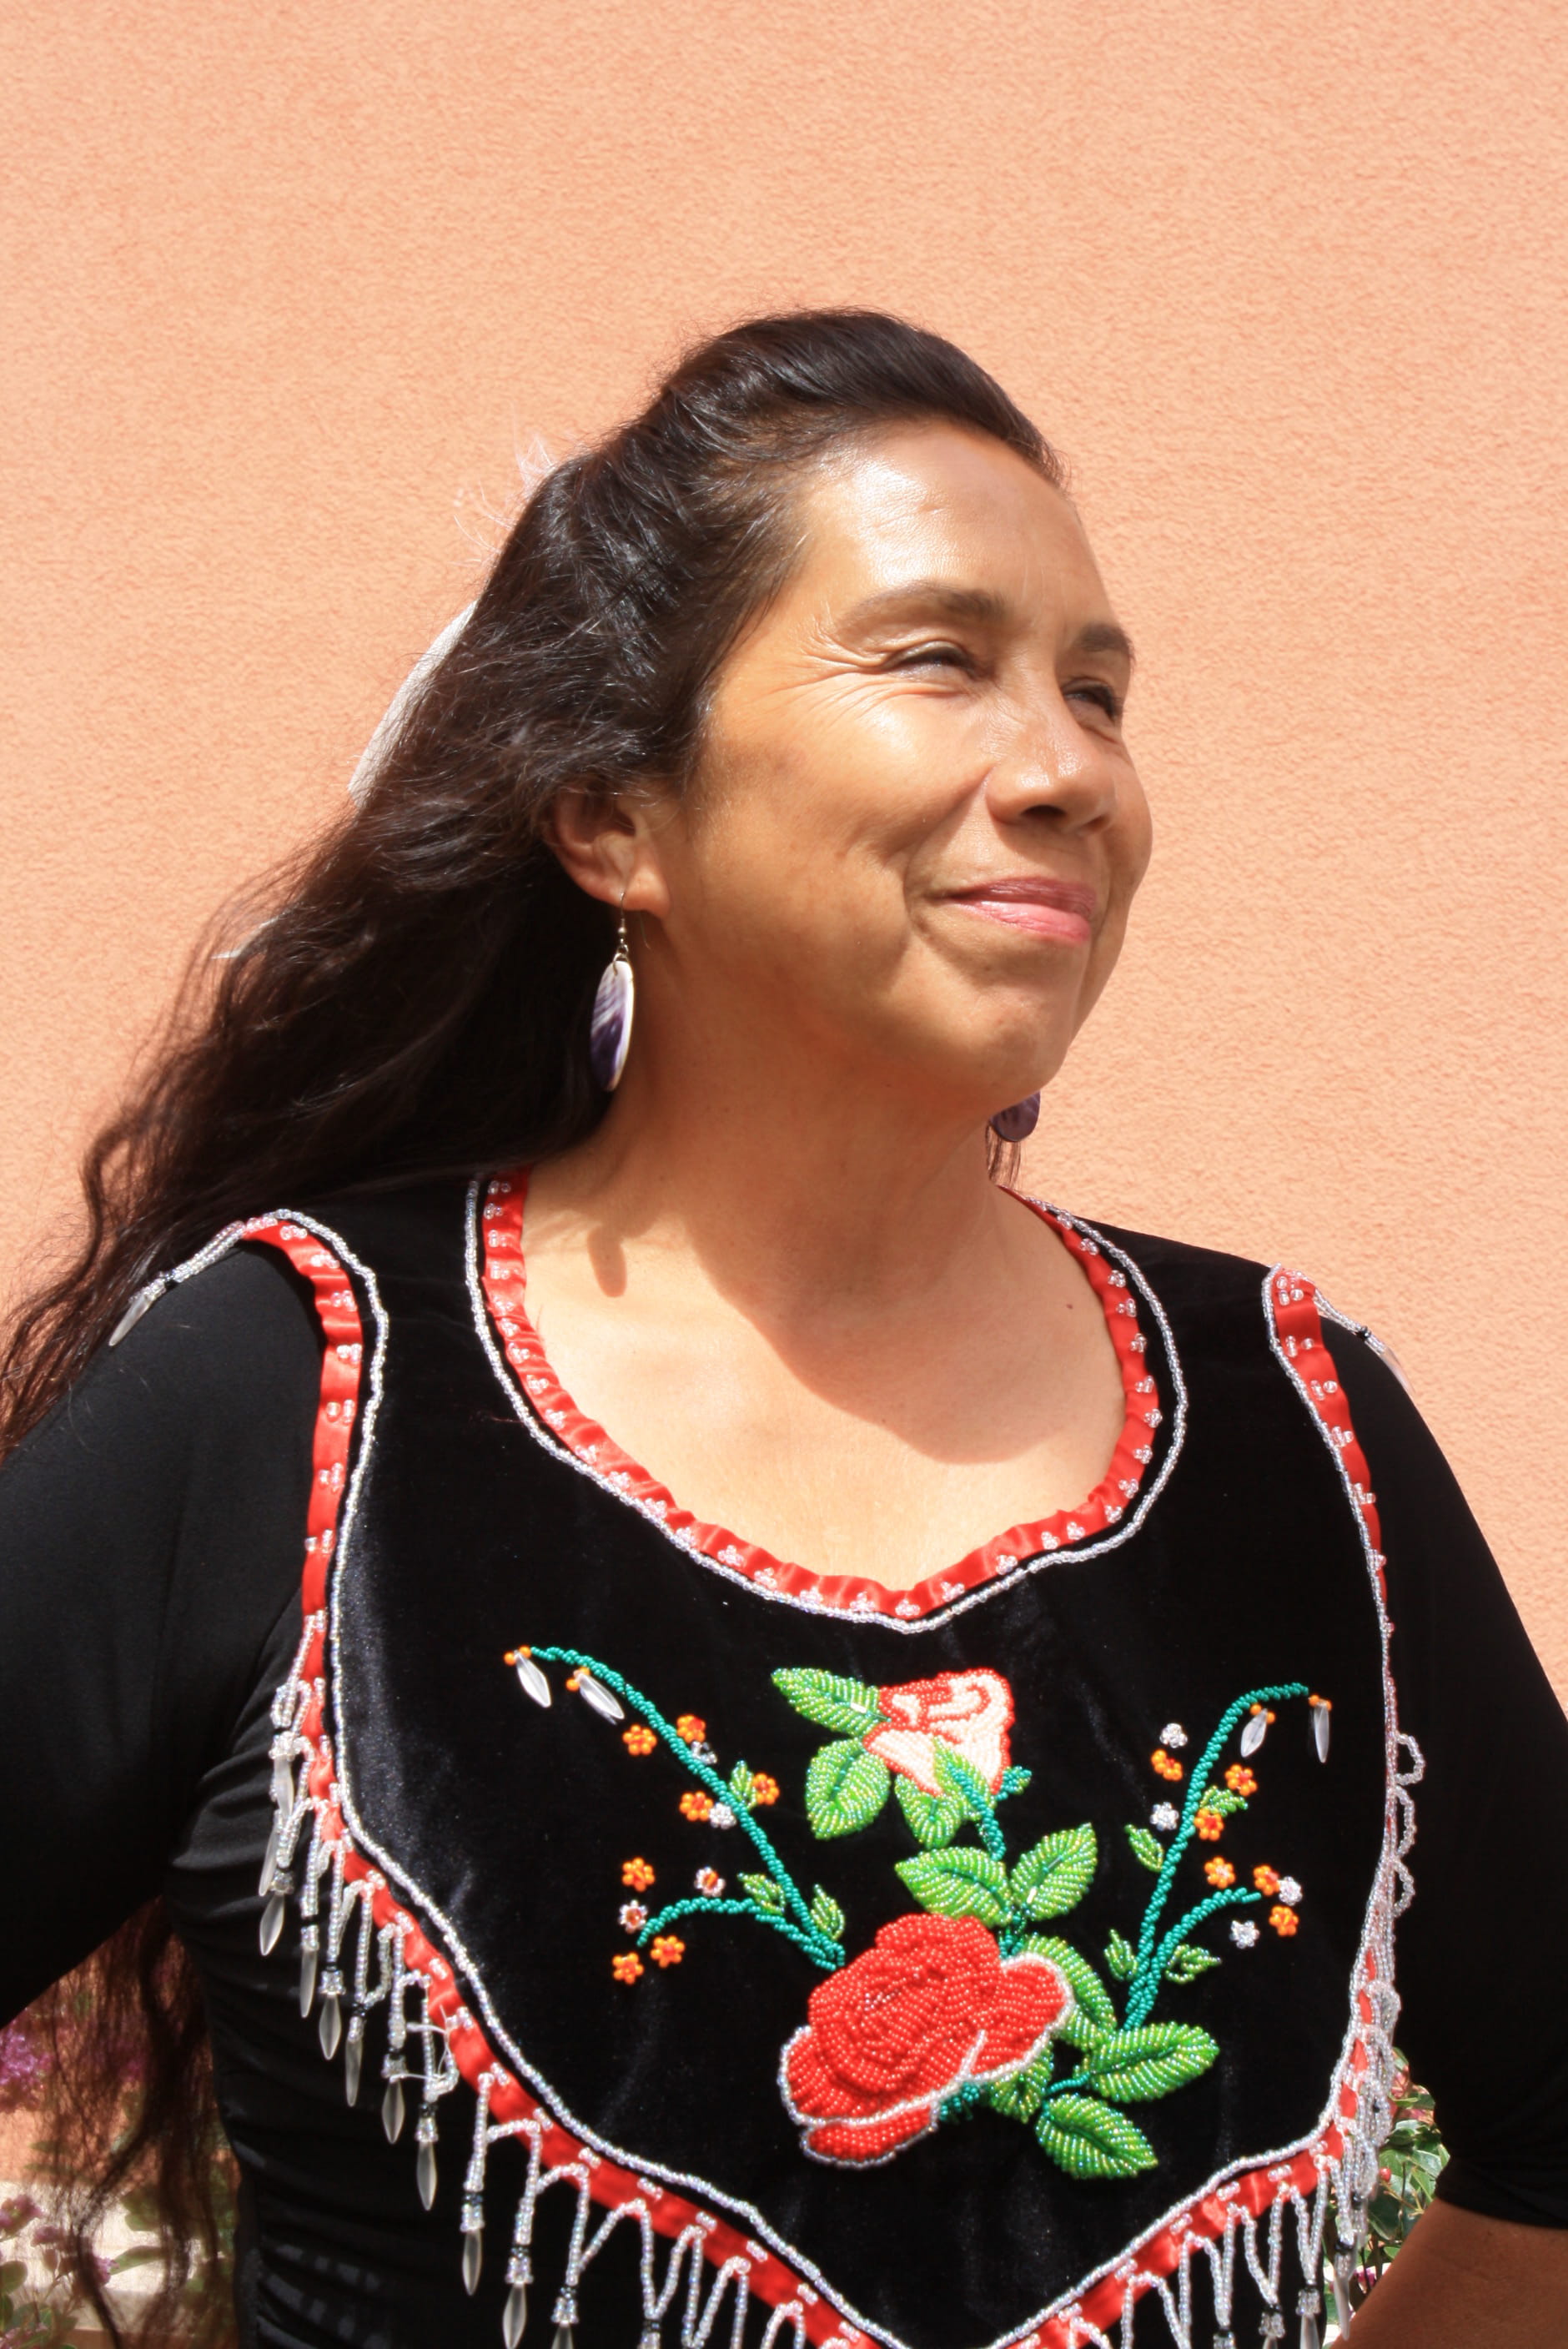 Skindigenous is a Native American Skincare Line